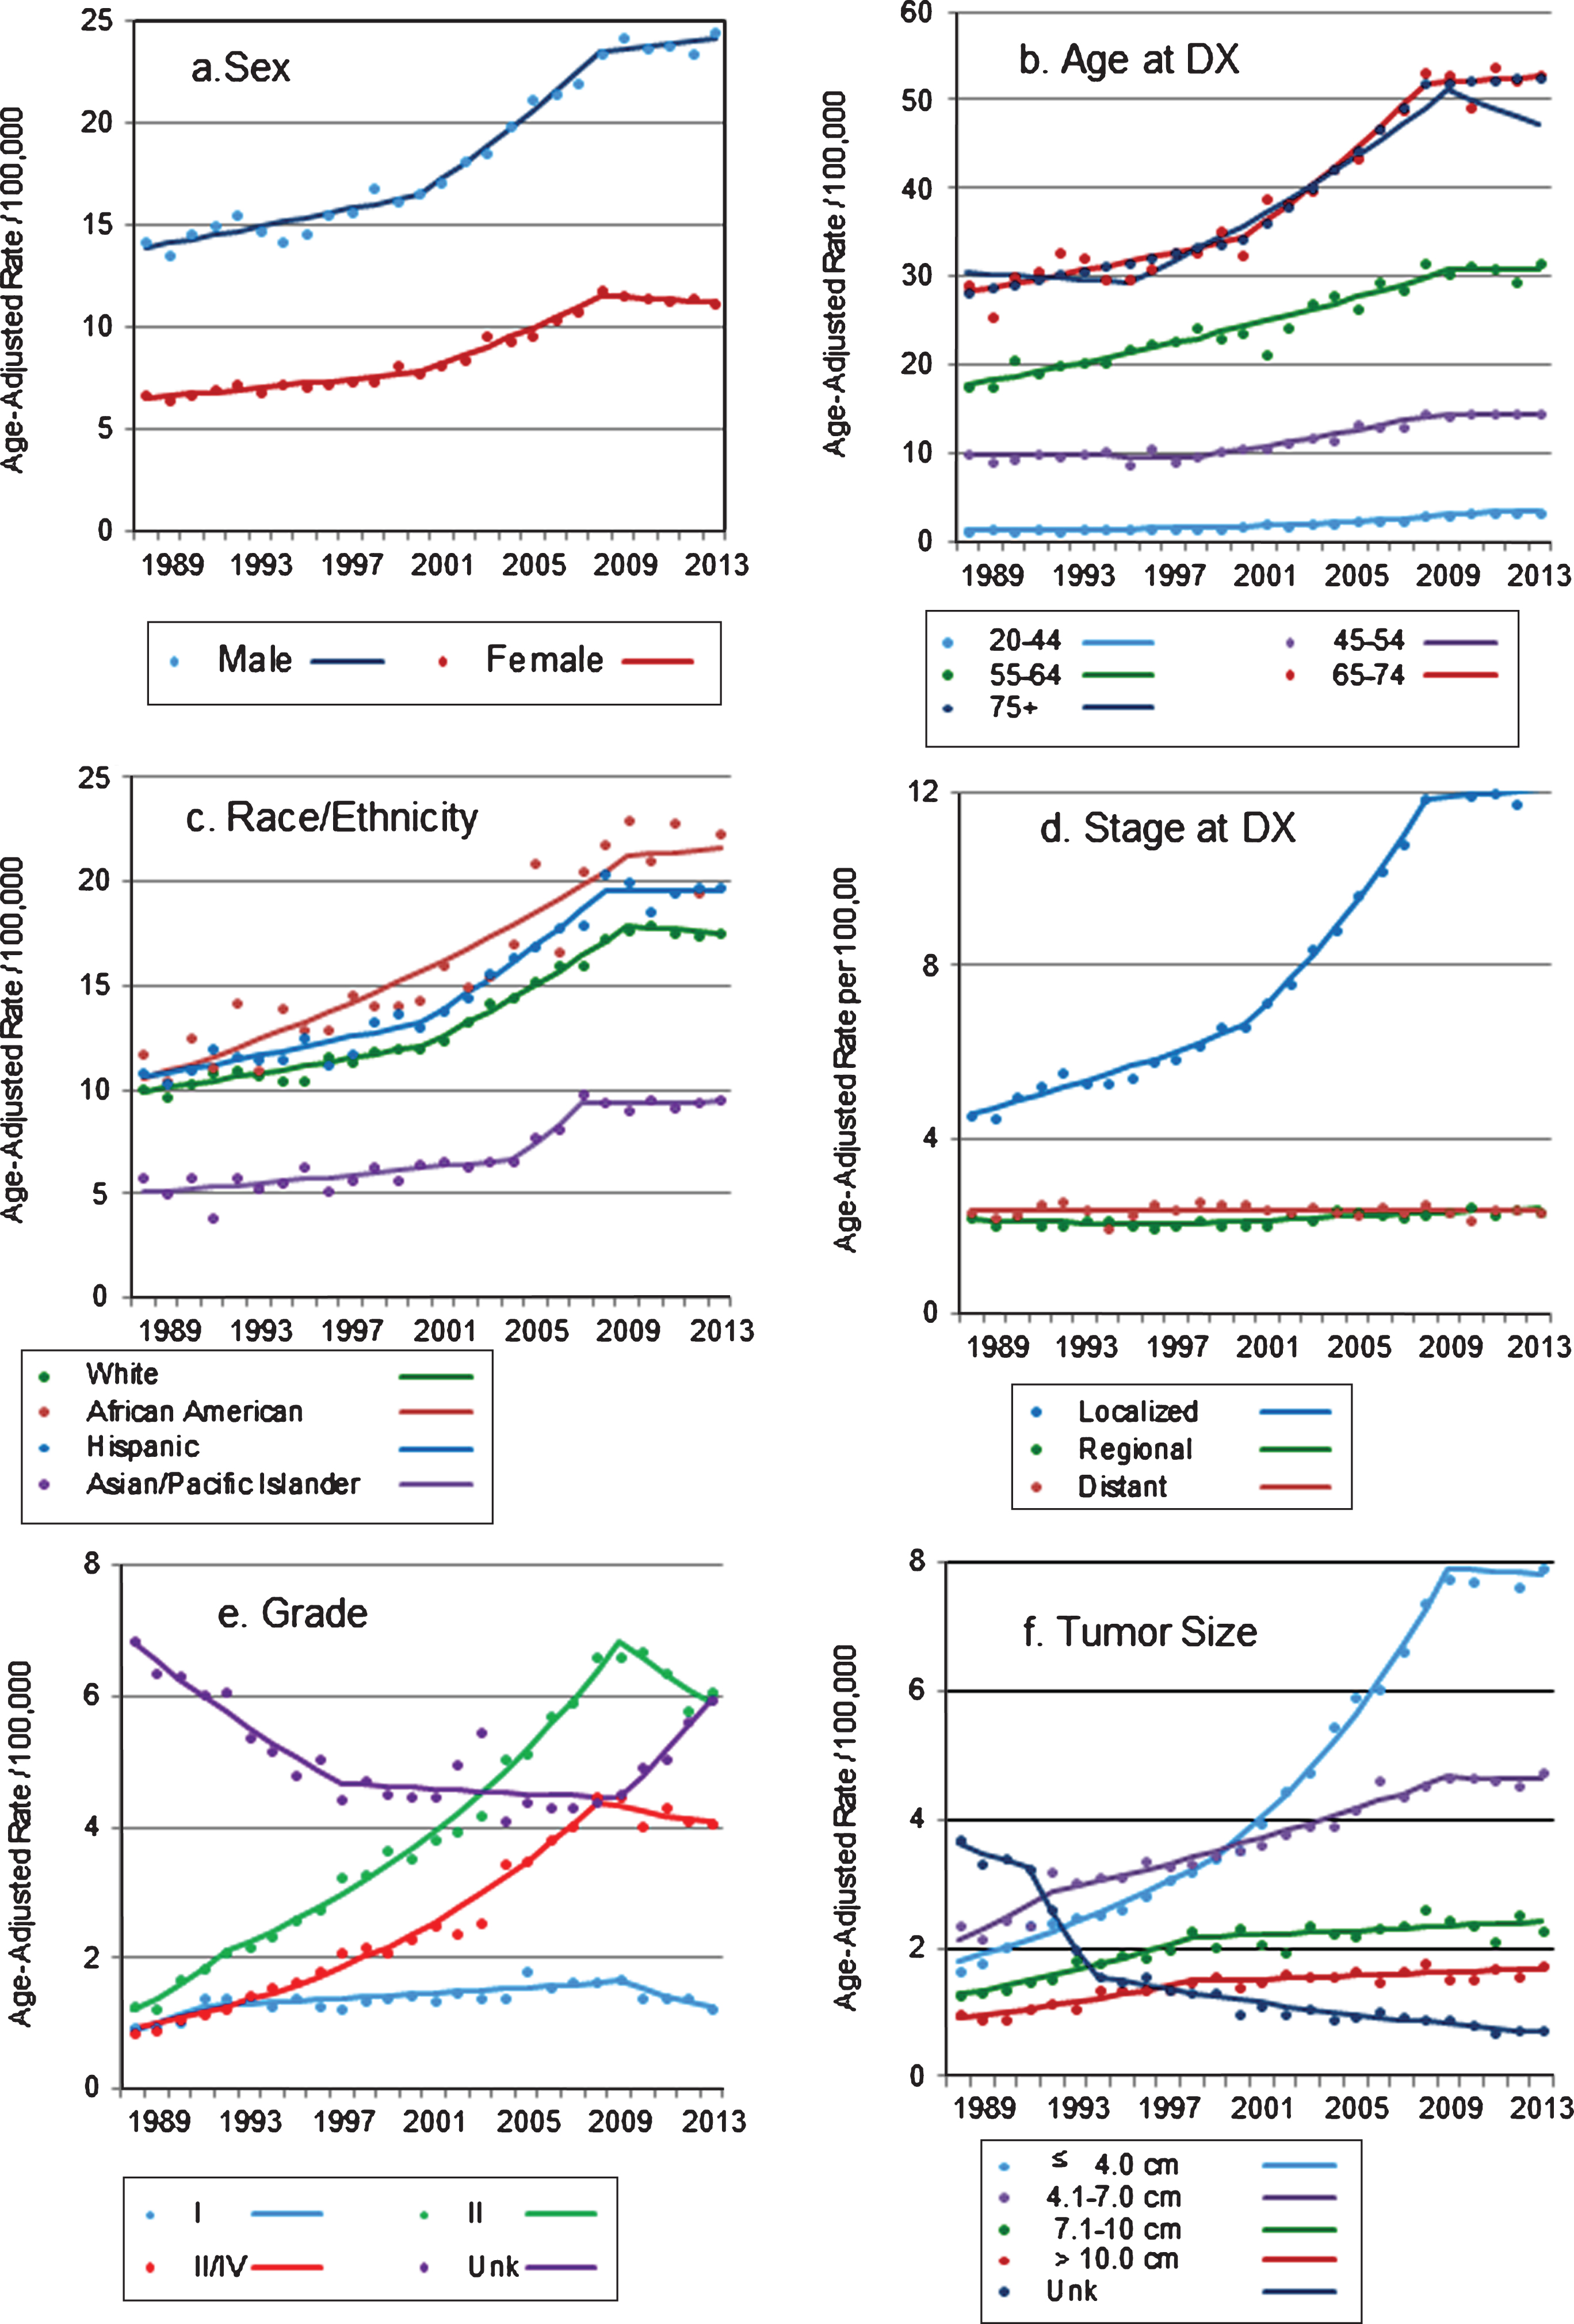 (a–f) Trends in age-adjusted incidence rates of renal cell carcinoma in California, 1988–2013 Markers: actual age-adjusted rates, lines: regression-estimated rates.